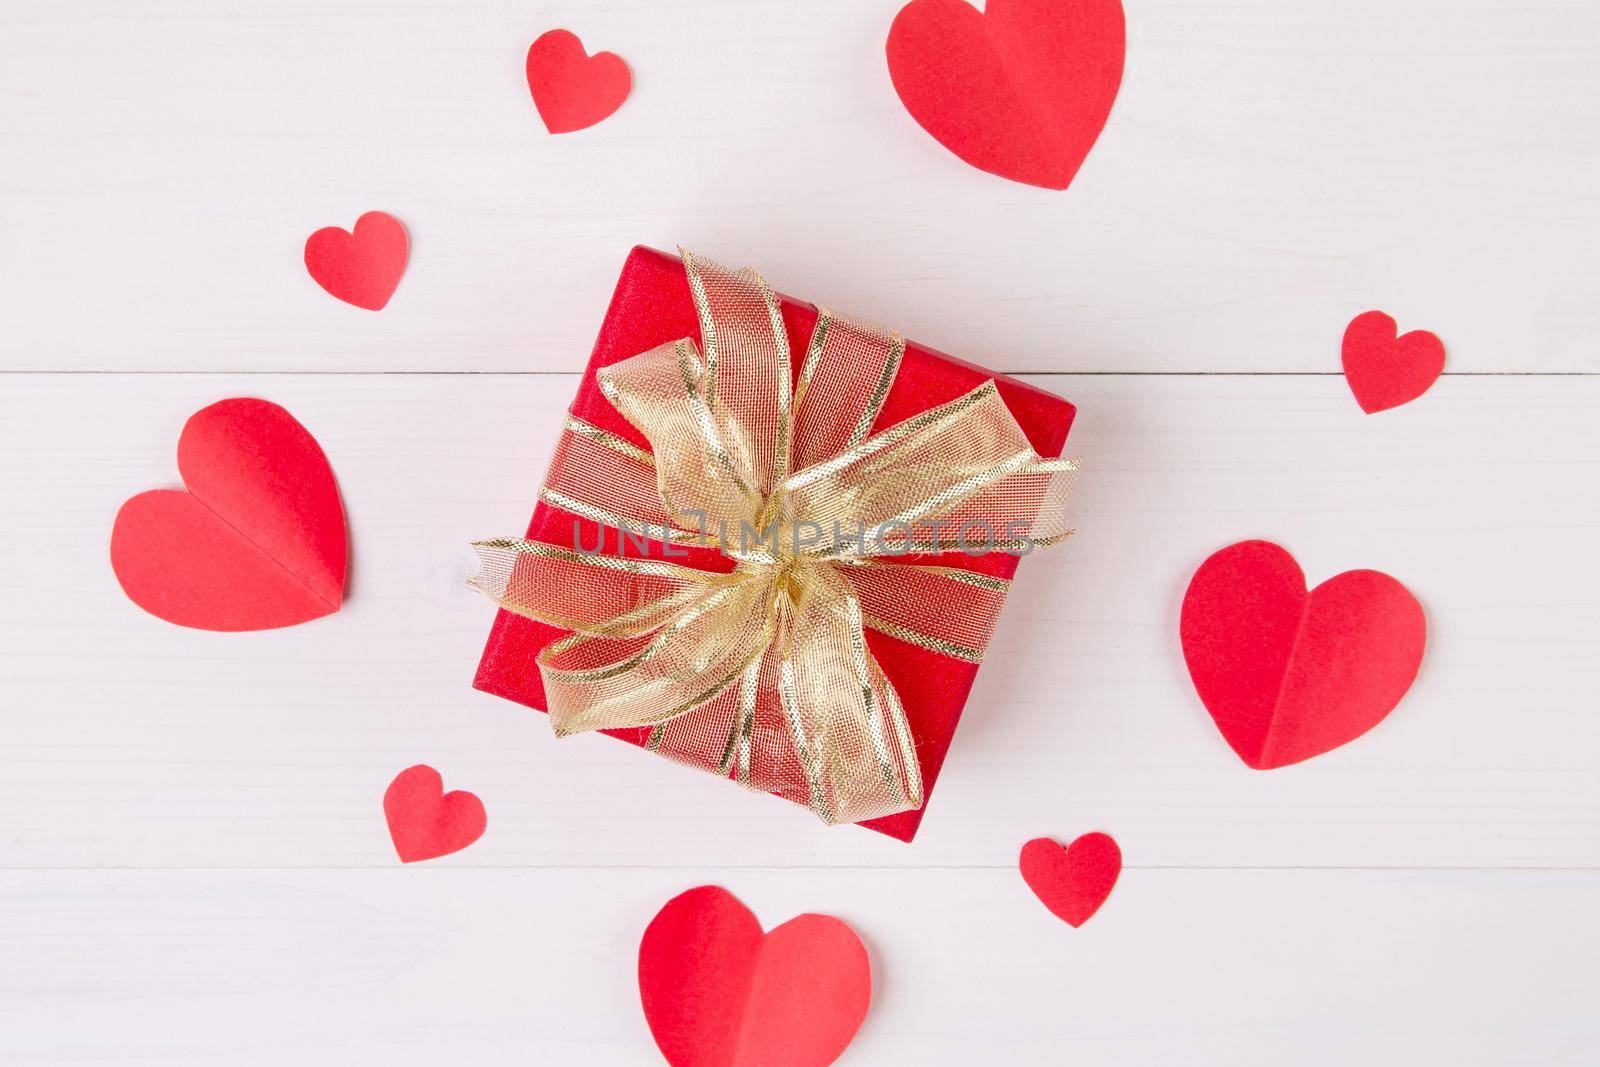 Gift box and heart shape paper on wooden table background, love and romance, presents in celebration and anniversary with surprise on desk, happy birthday, donate and charity, valentine day concept.